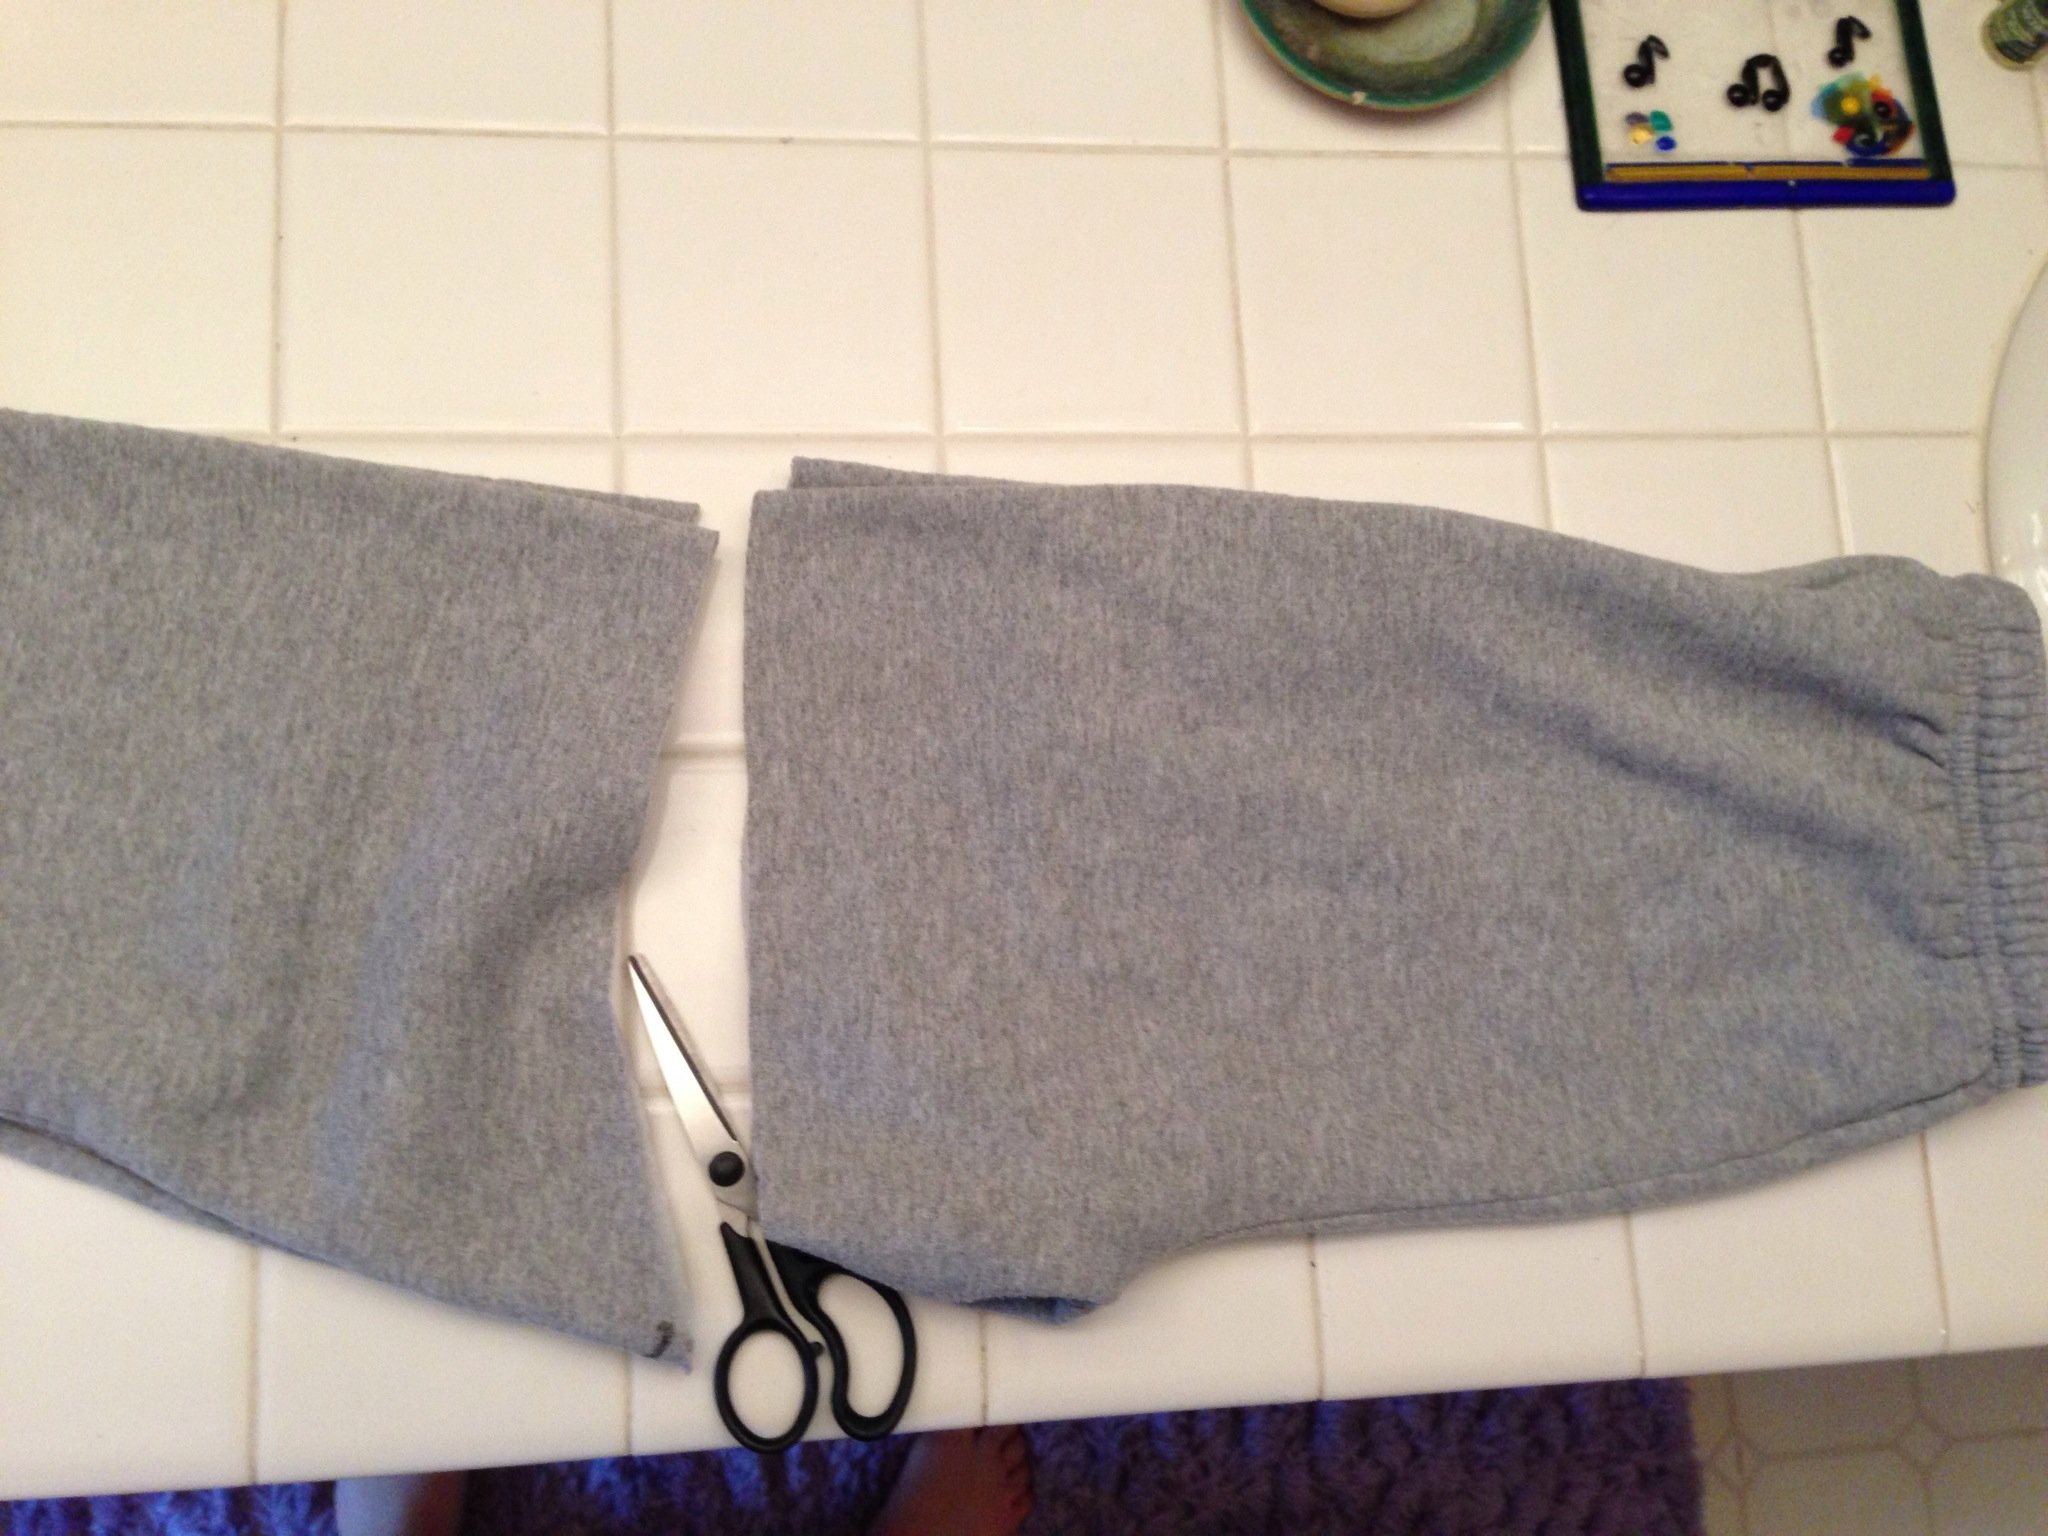 How To Cut Sweatpants Into Shorts | vlr.eng.br